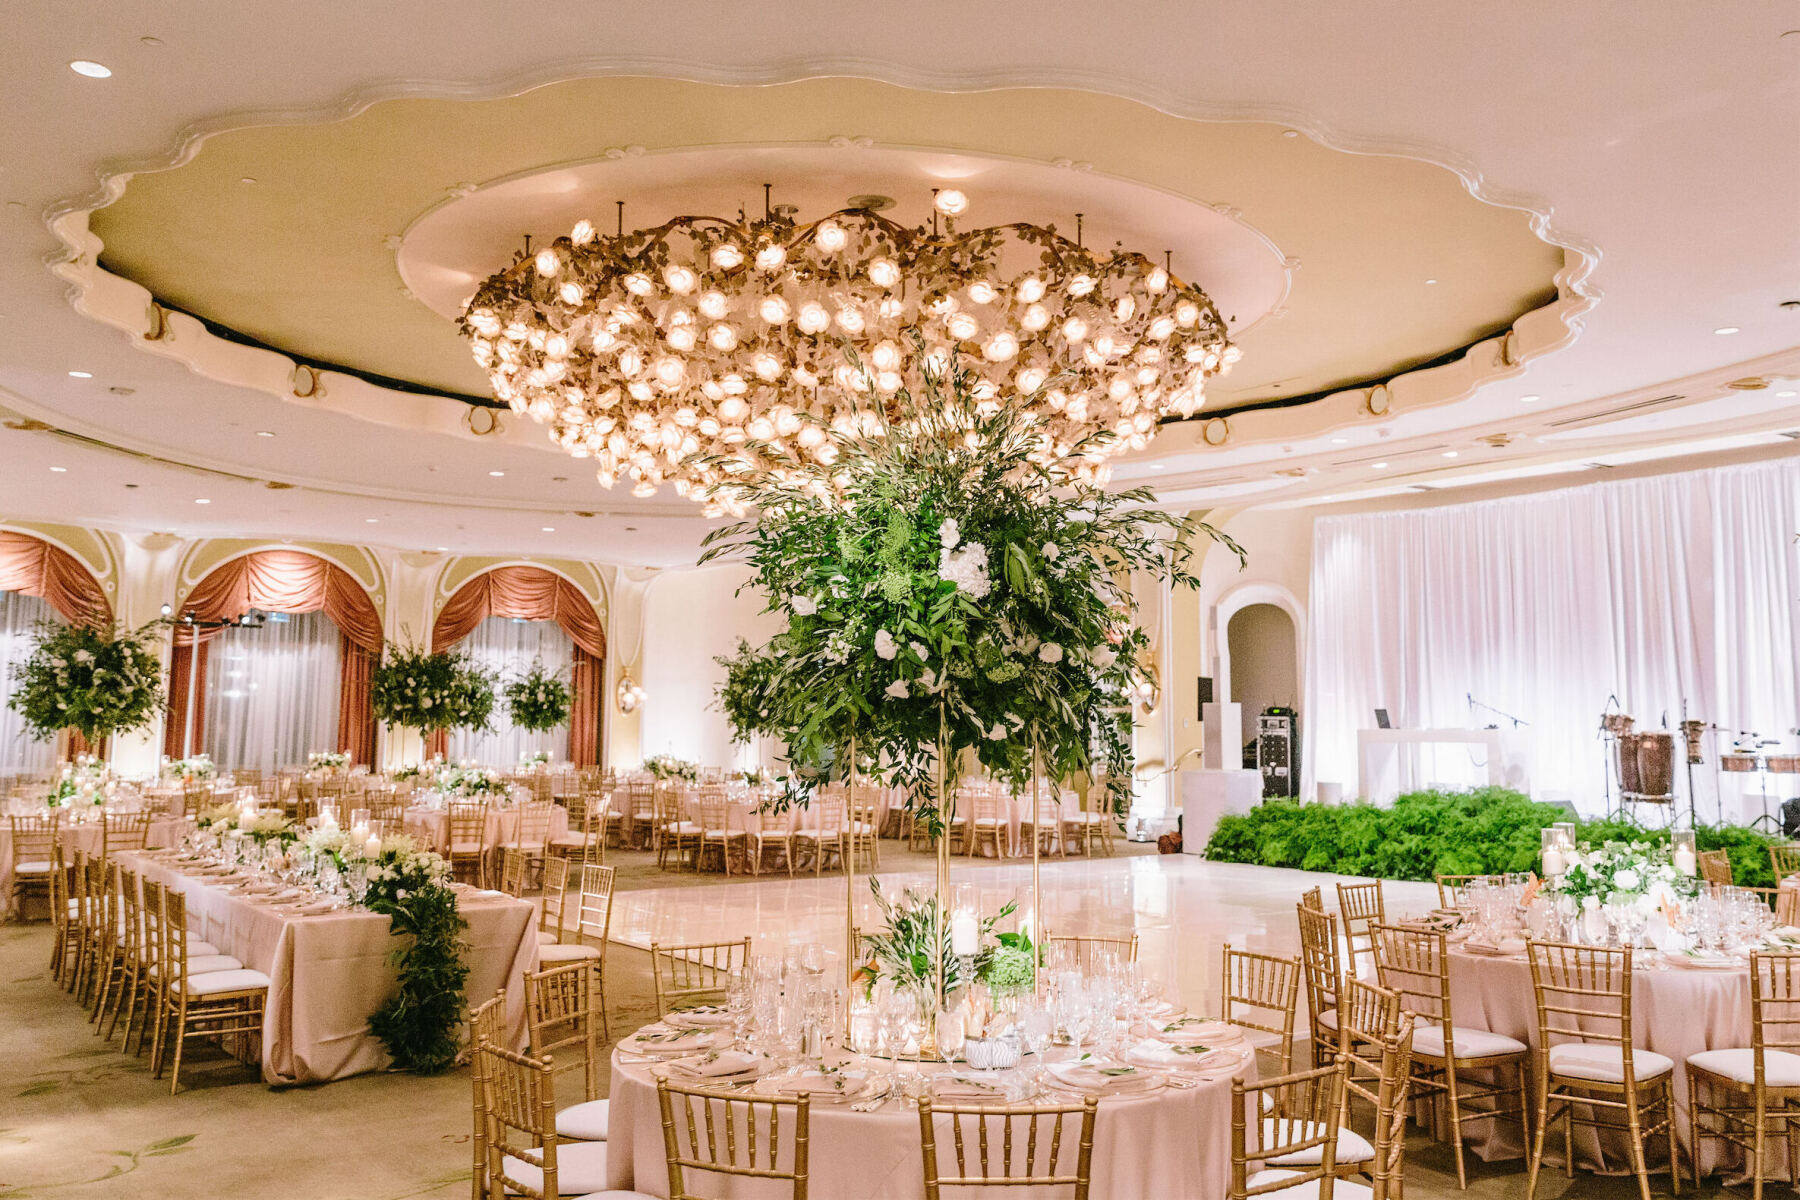 Celebrity Wedding Venue: An indoor reception setup in the ballroom of the Beverly Hills Hotel.